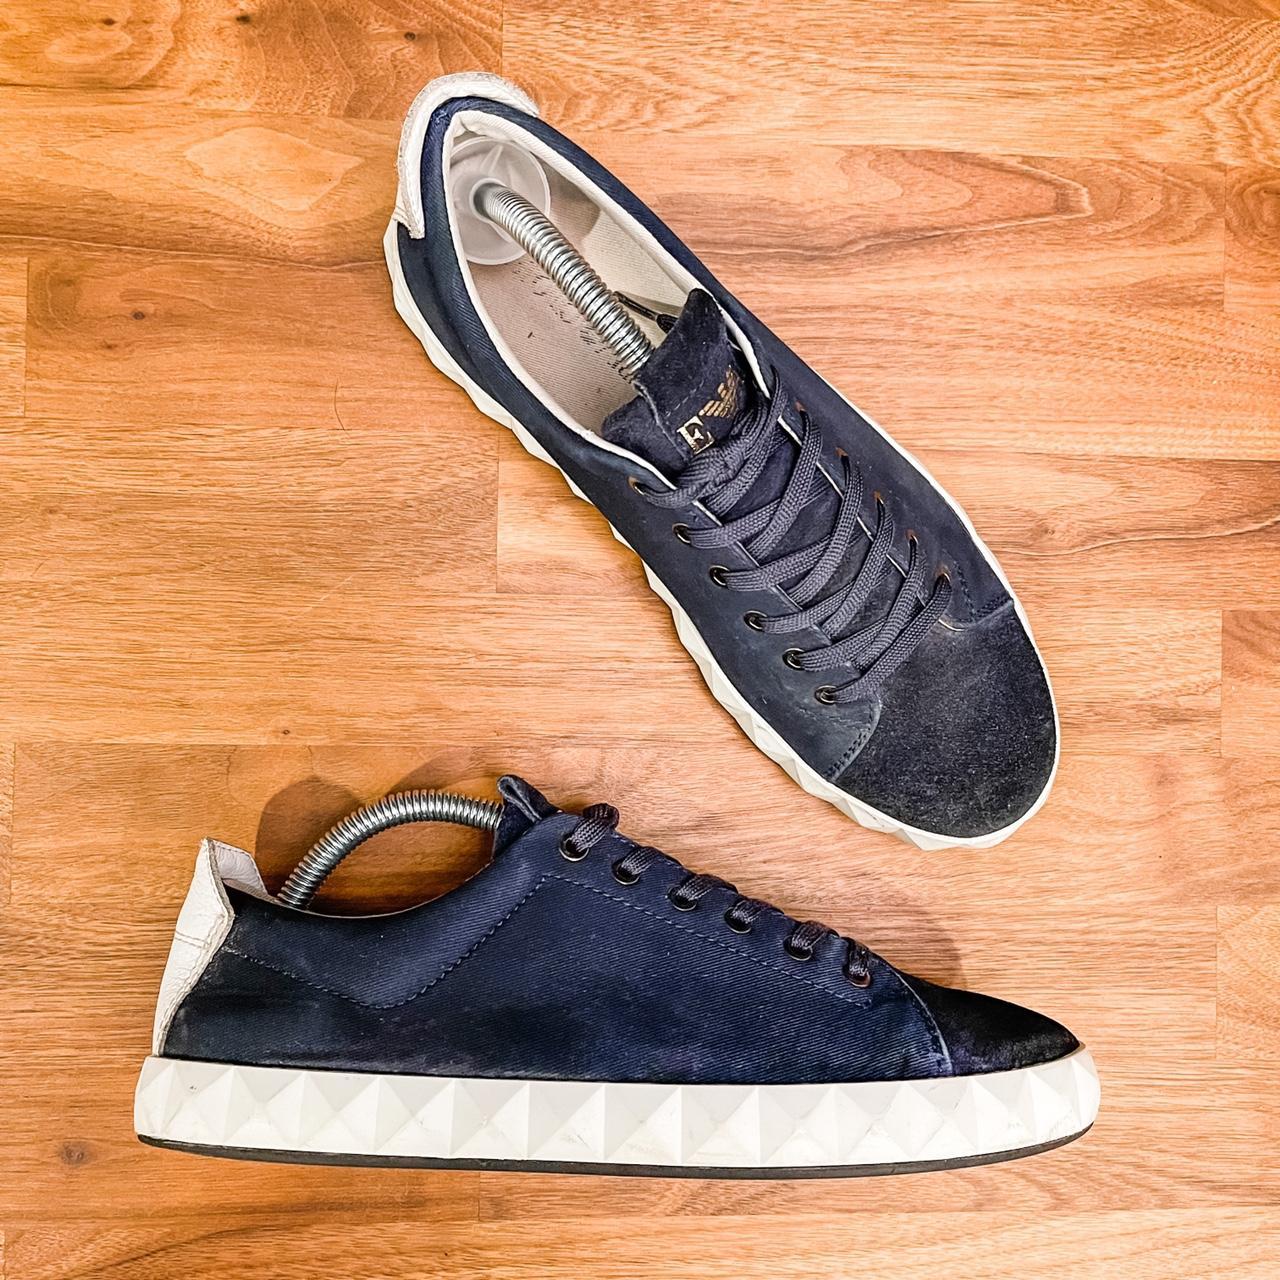 Product Image 1 - Gorgeous dark blue suede sneakers